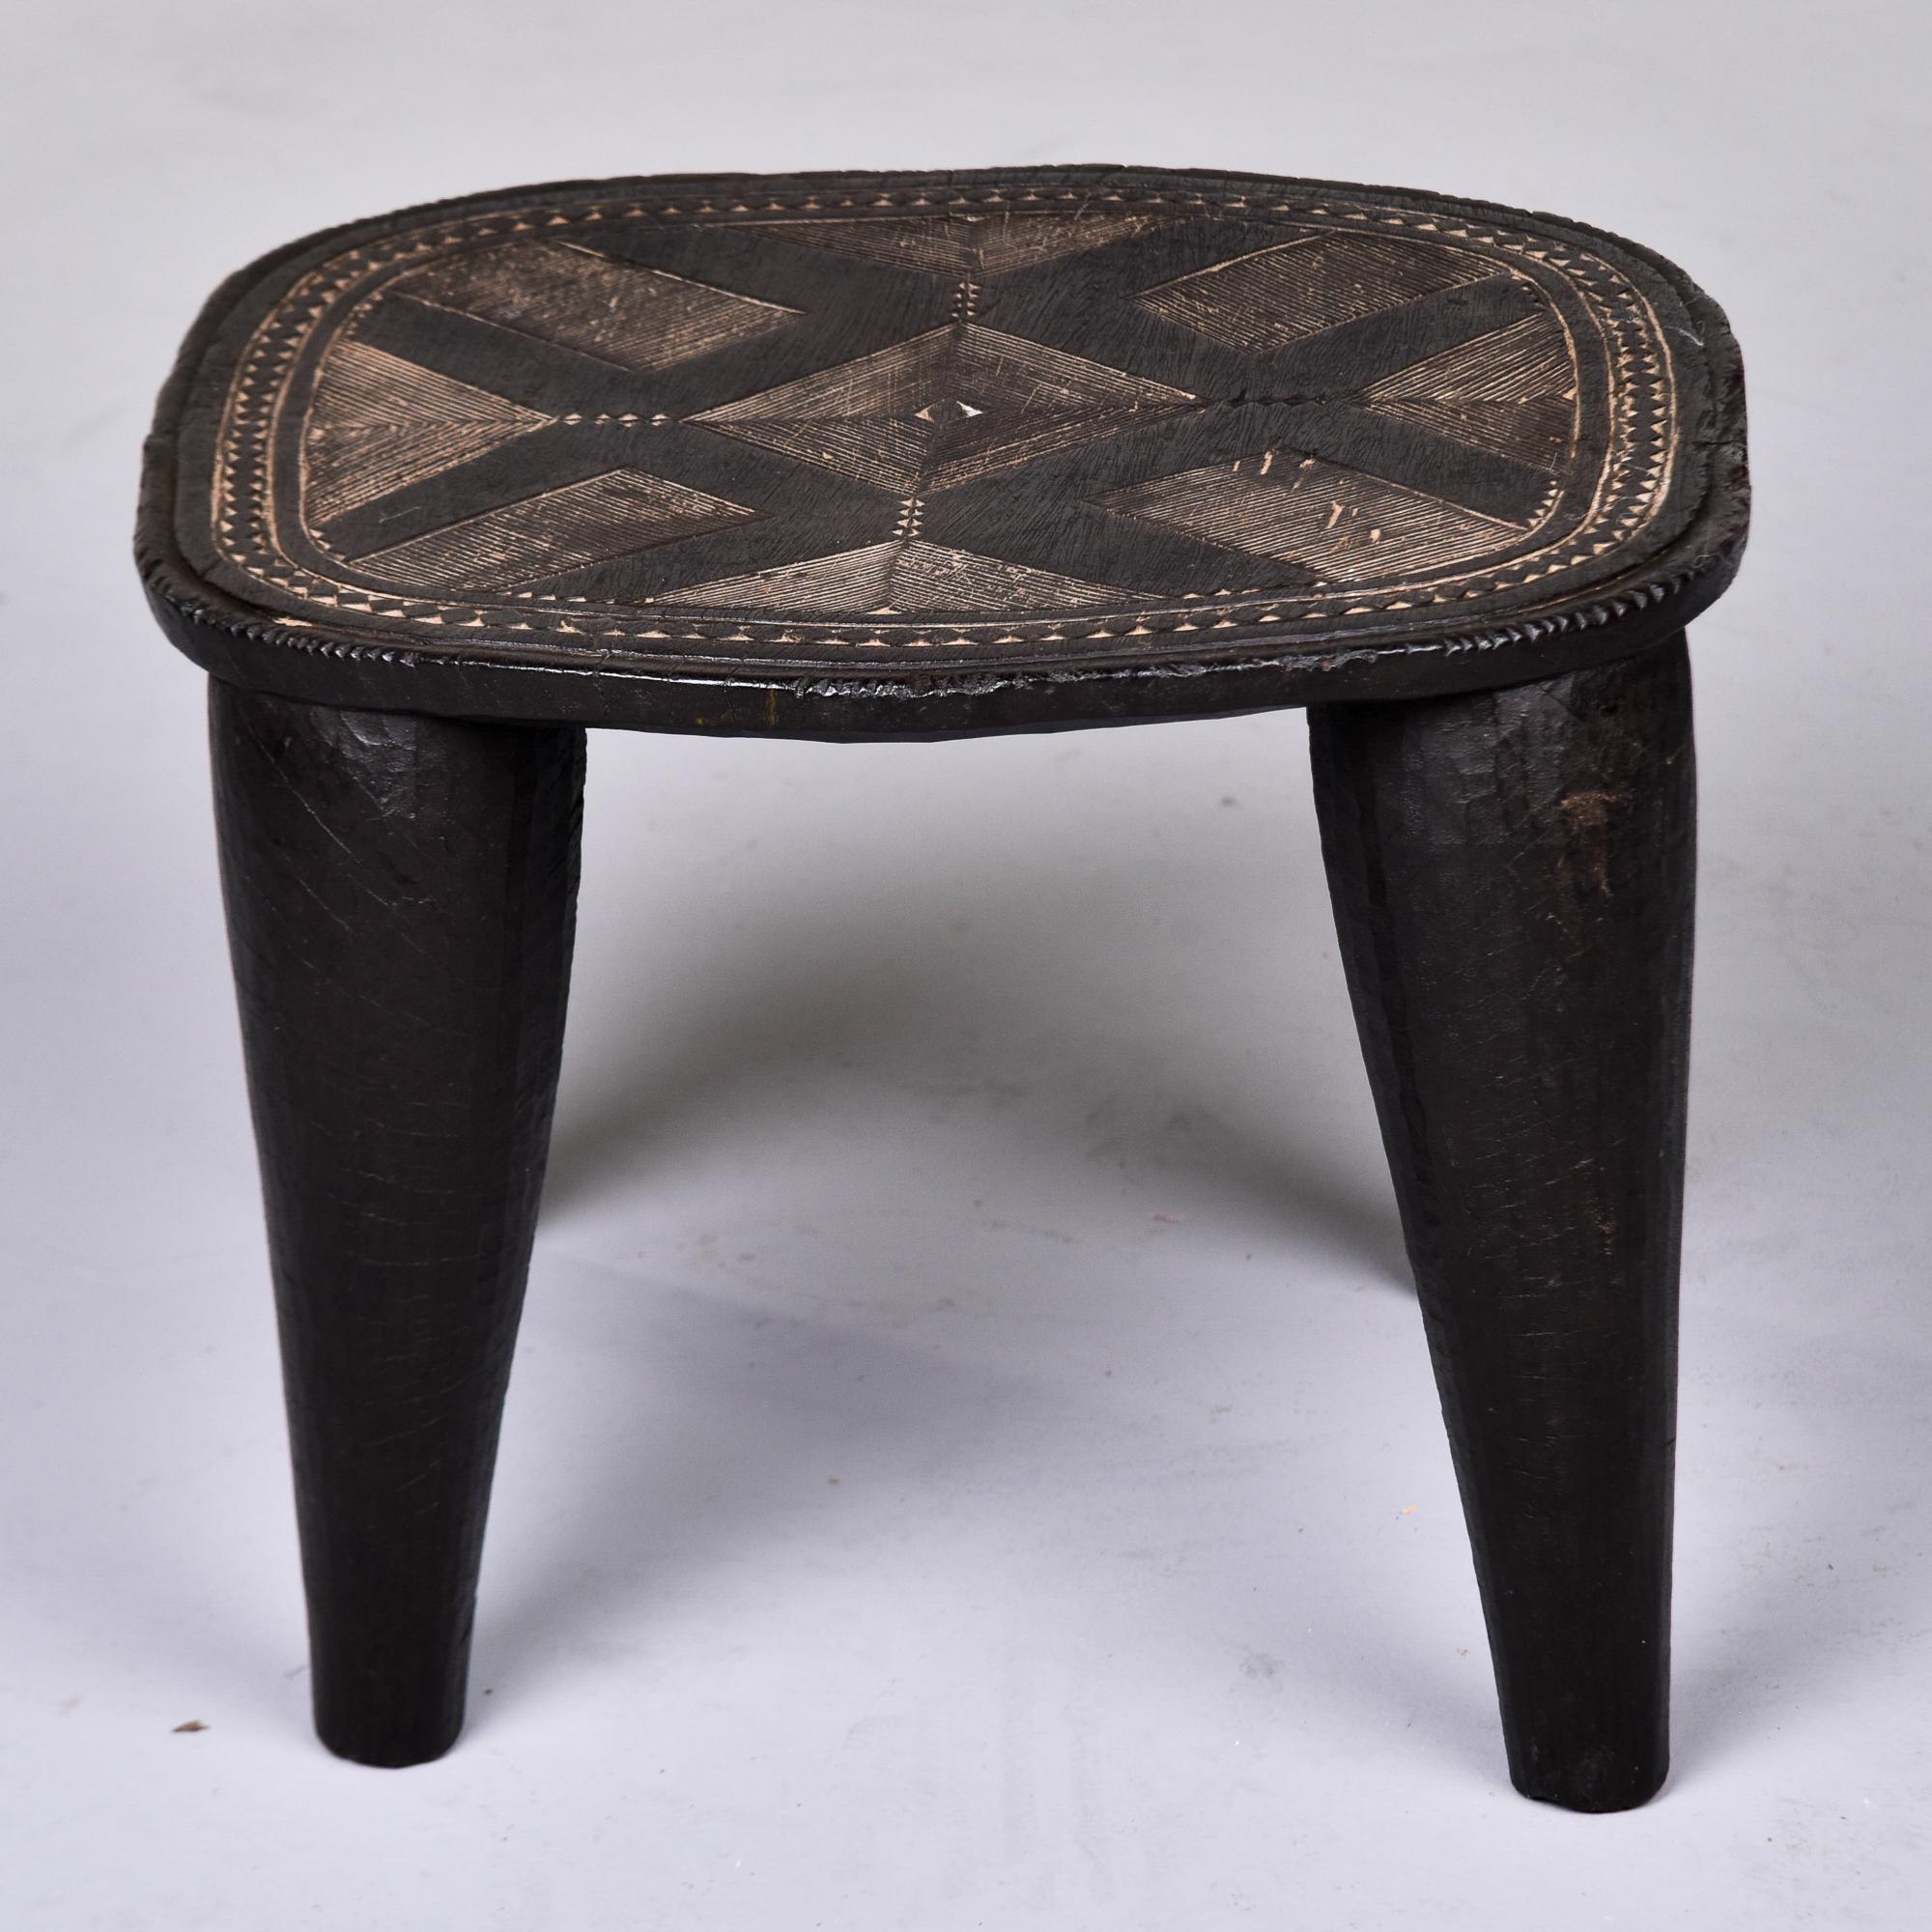 Vintage Carved Small African Stool or Table by the Nupe of Nigeria  1